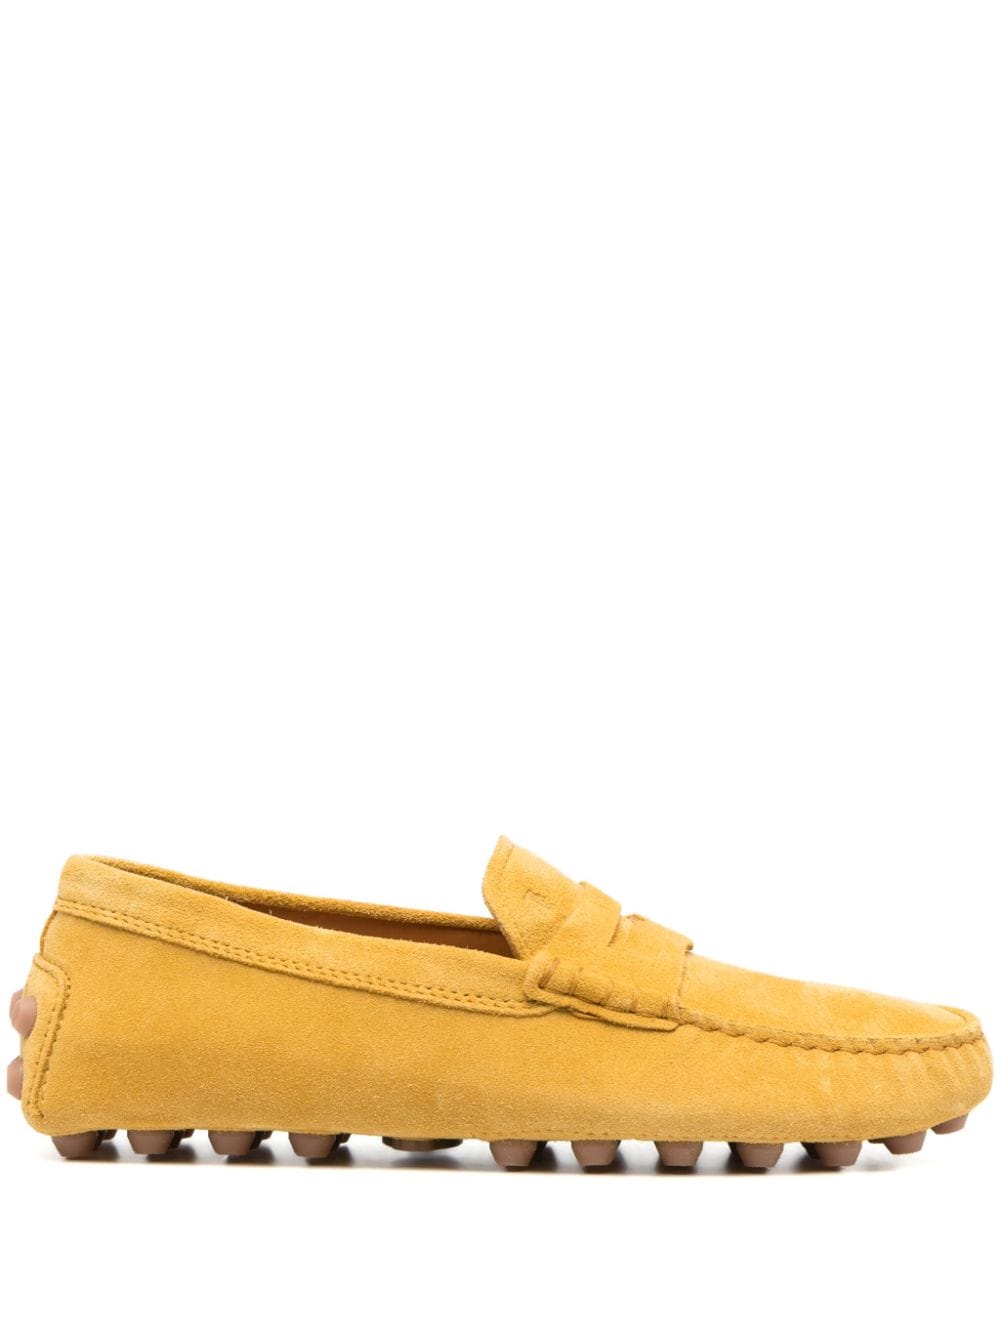 Tod's Gommino Bubble suede loafers - Yellow von Tod's